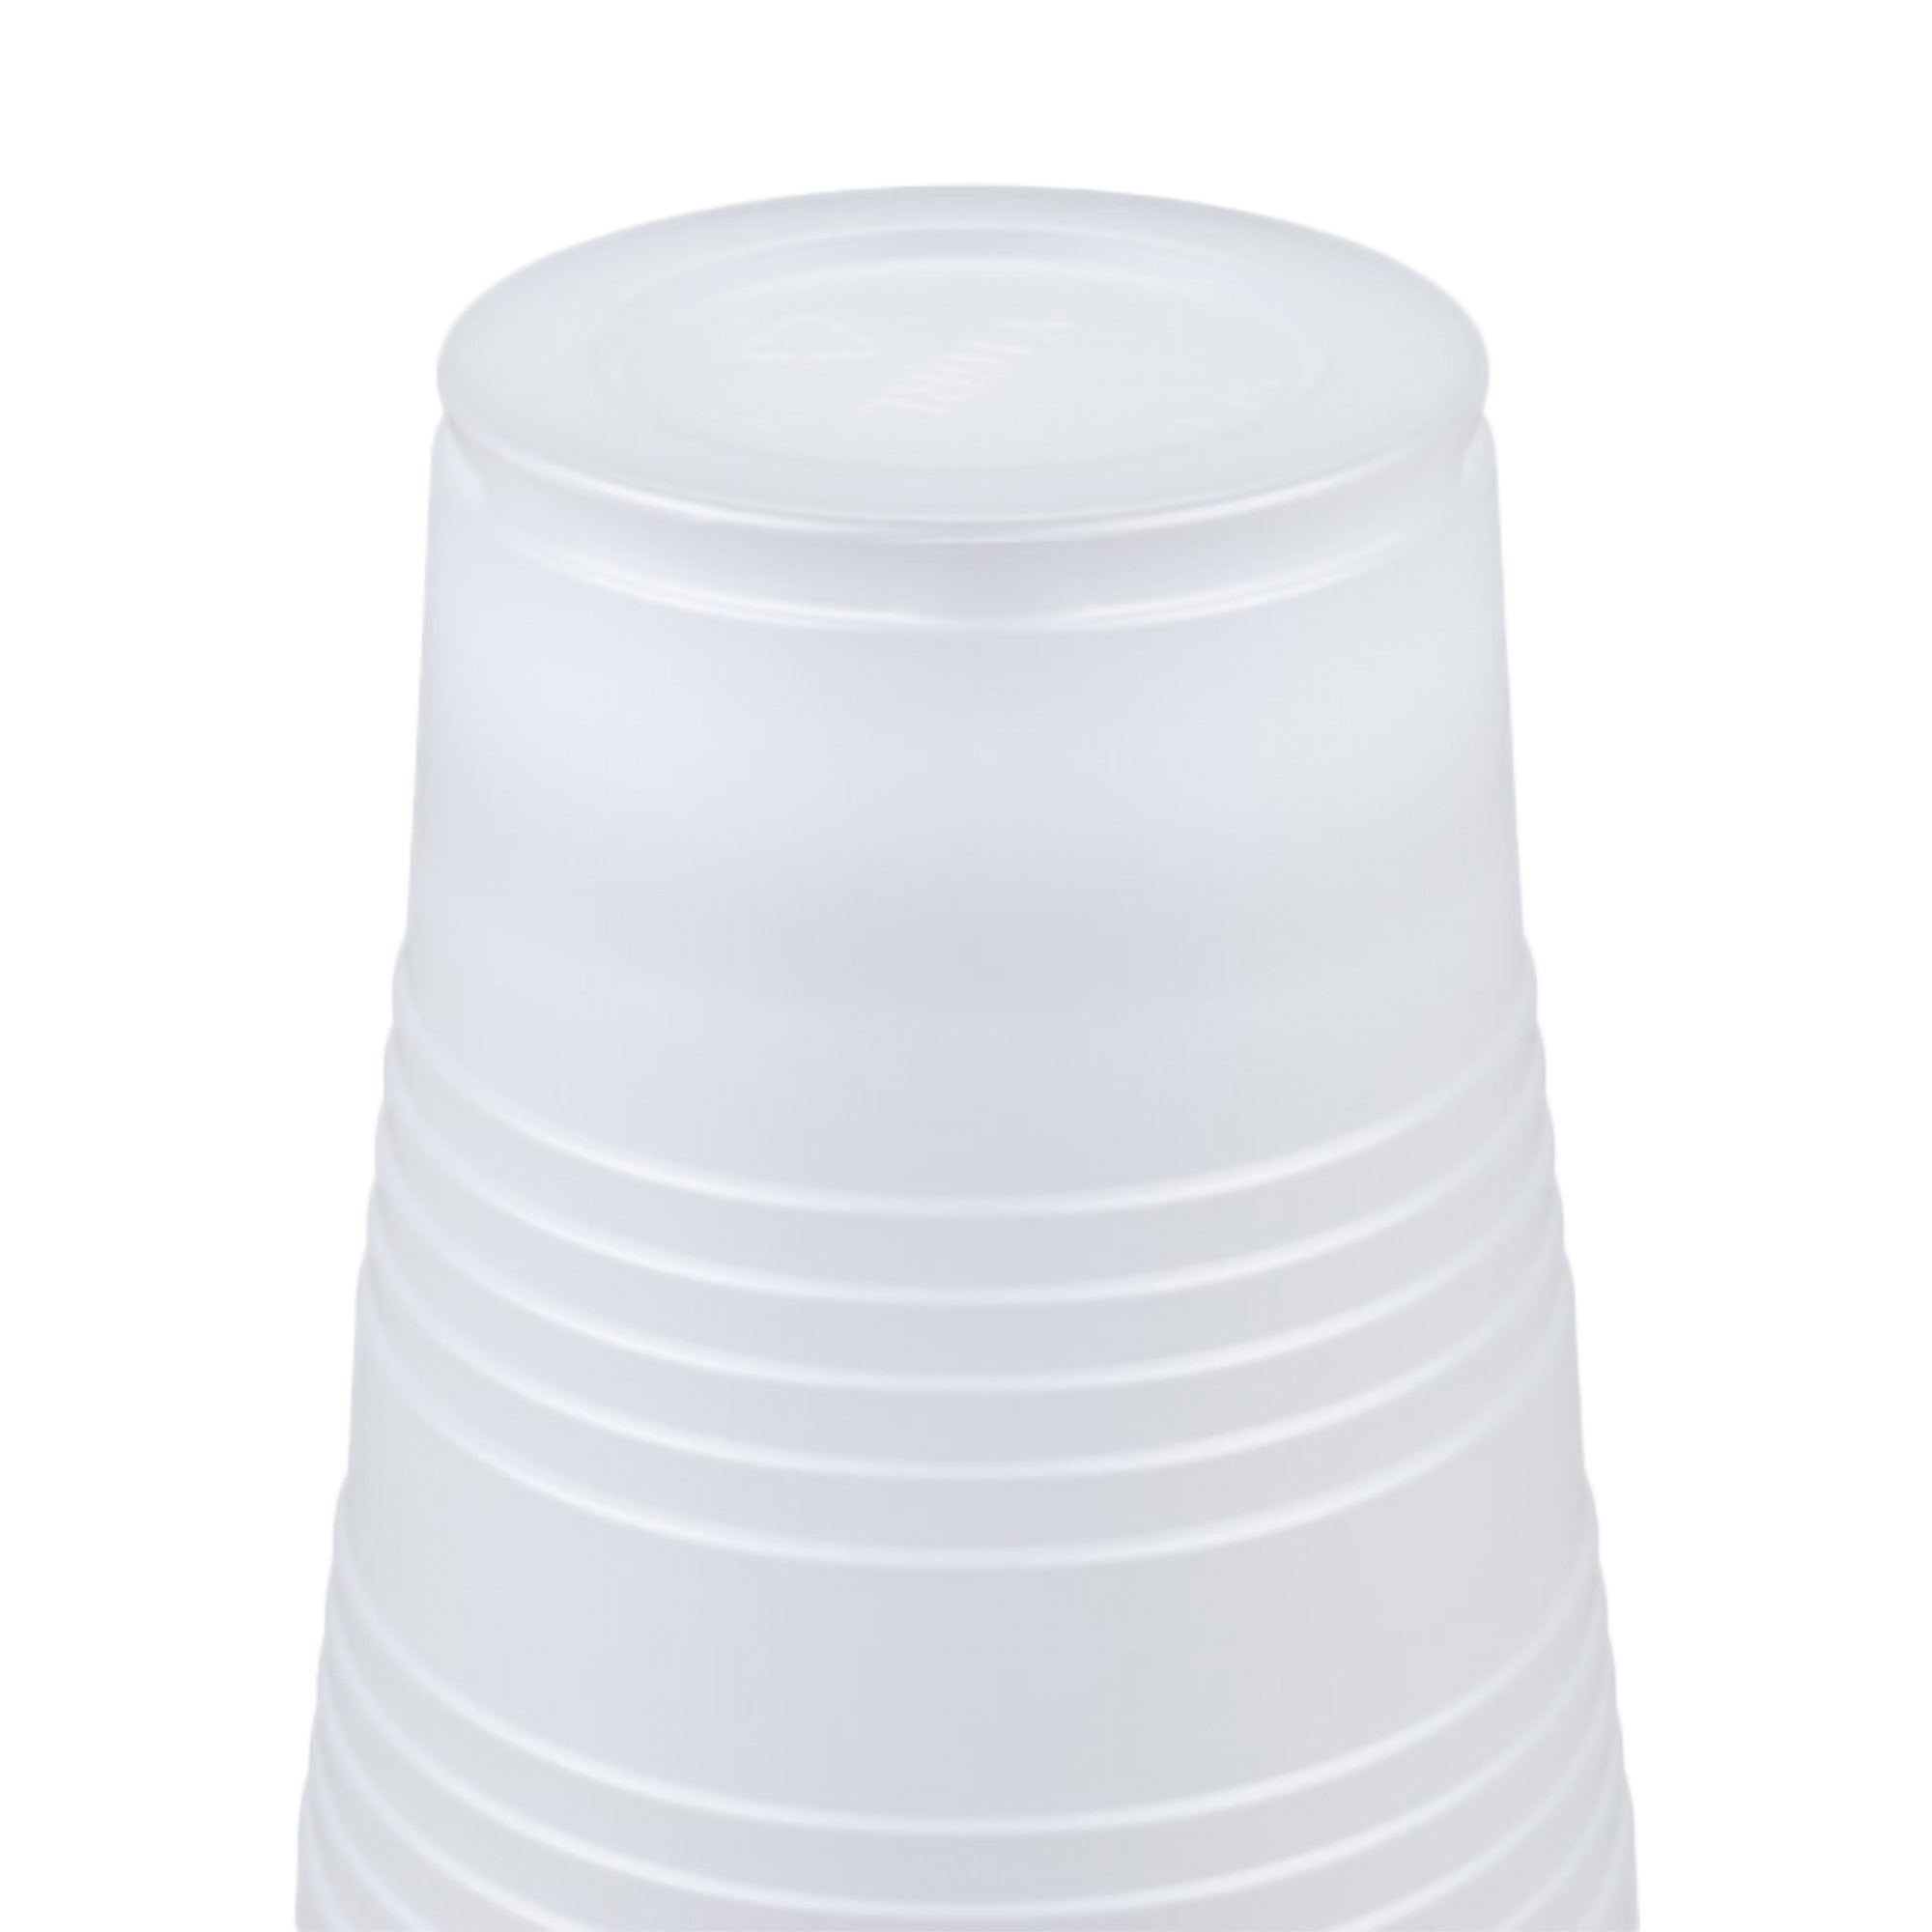 Conex Galaxy Polystyrene Plastic Cold Cups, 12 oz, 50/Pack